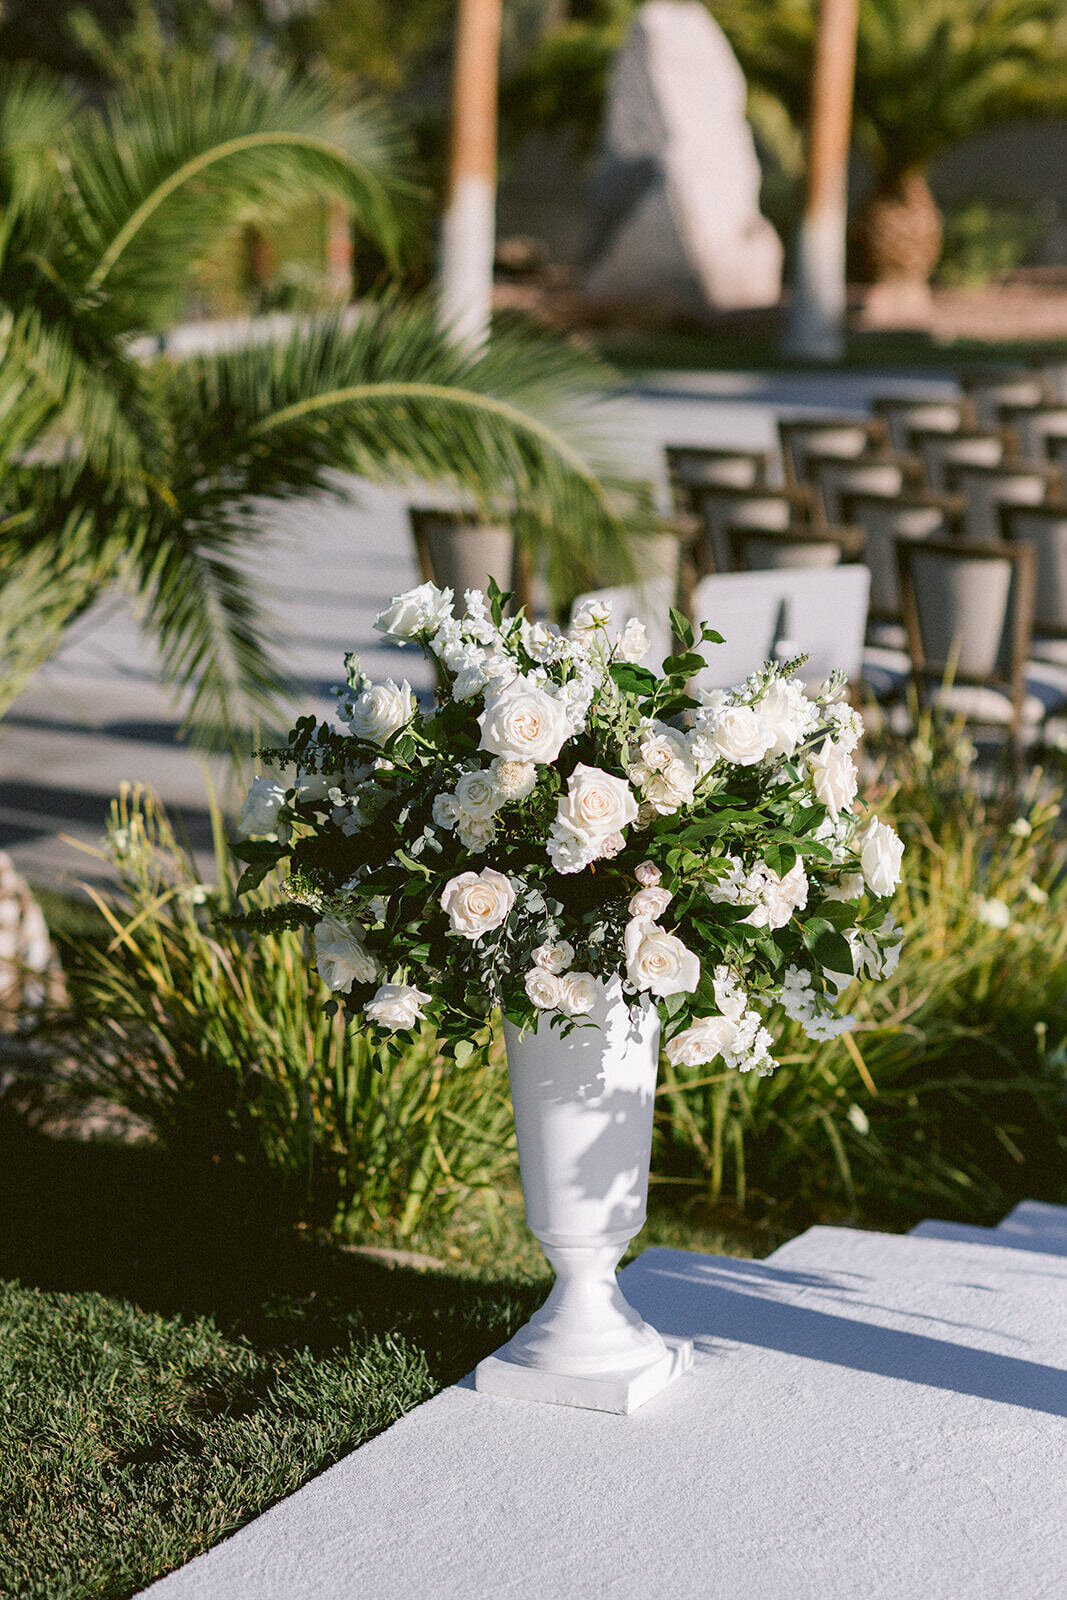 Soft and Romantic Wedding at Lotus House in Las Vegas - 31